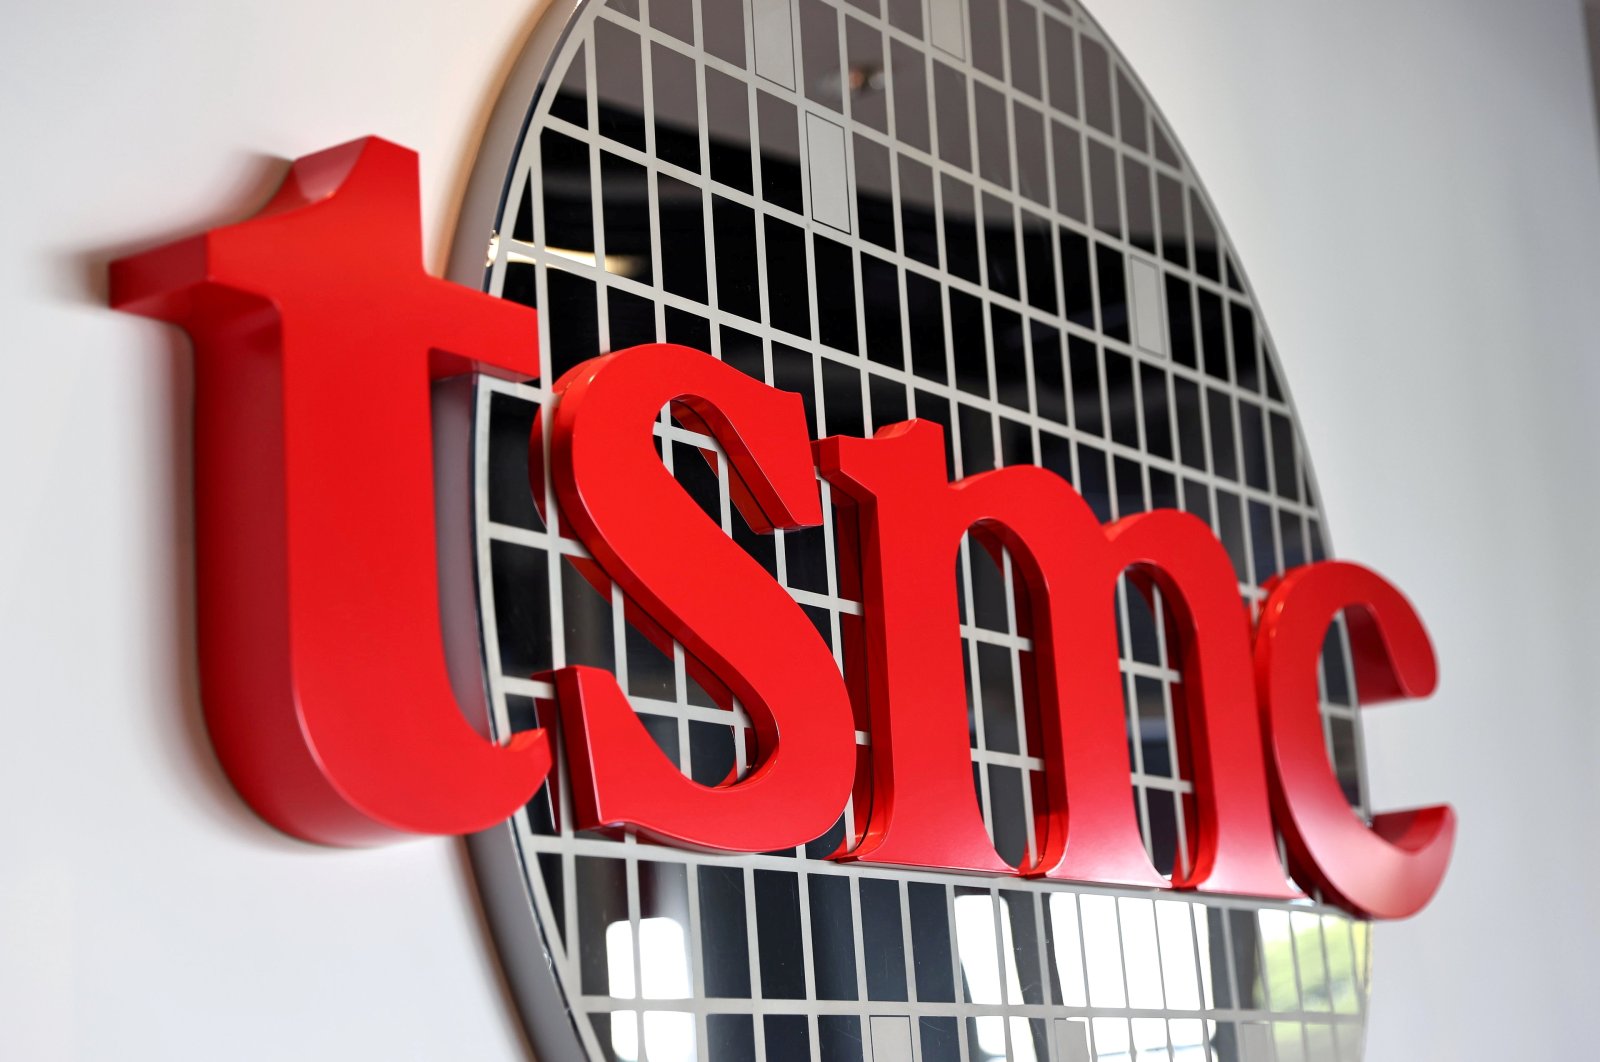 The logo of Taiwan Semiconductor Manufacturing Co. (TSMC) is pictured at its headquarters, in Hsinchu, Taiwan, Jan. 19, 2021. (REUTERS Photo)